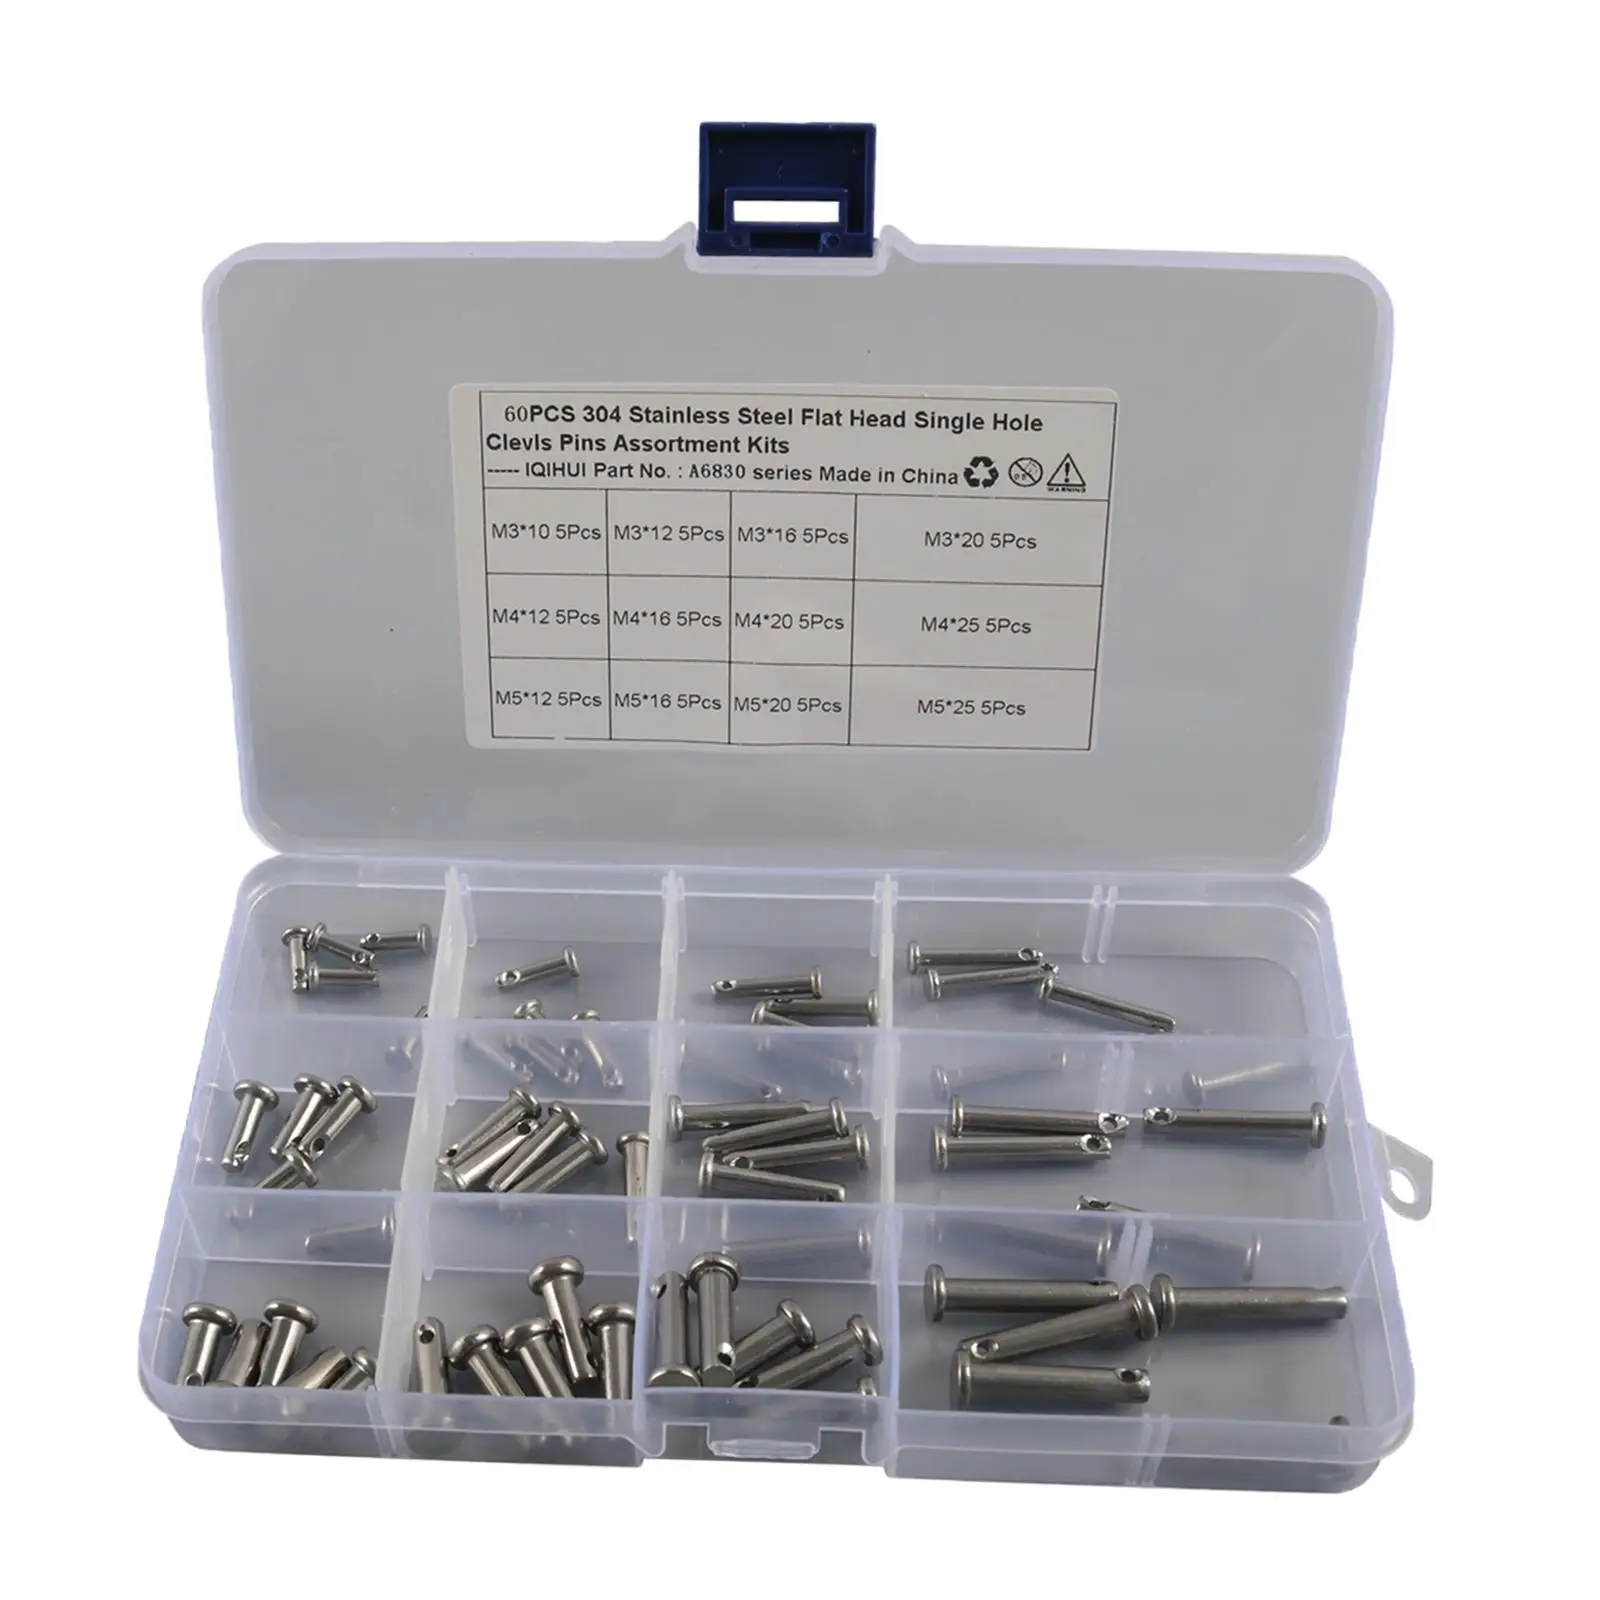 60 Pieces Clevis Pins Assortment Kit, 12 Type 4 M5 304 Stainless Steel with Plastic Box Location for Home DIY Project Machine